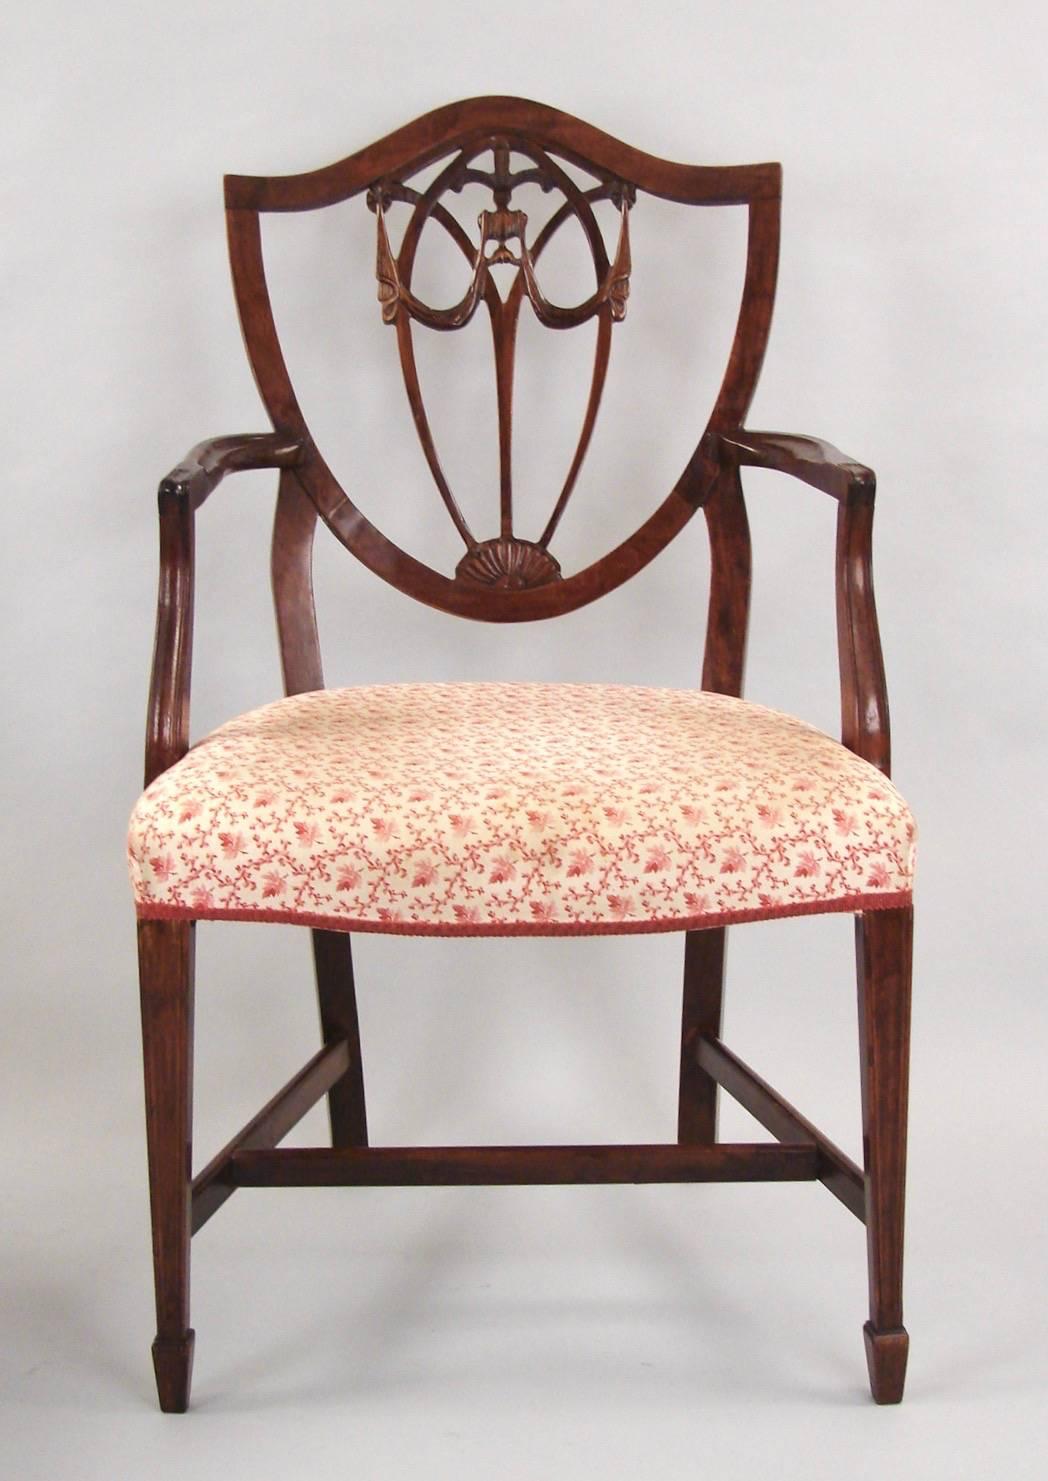 A set of eight Hepplewhite style shield back mahogany dining chairs consisting of two armchairs six side chairs each with upholstered seats, the nicely detailed back splats centered by carved Prince of Wales' feathers and swags, the serpentine seats